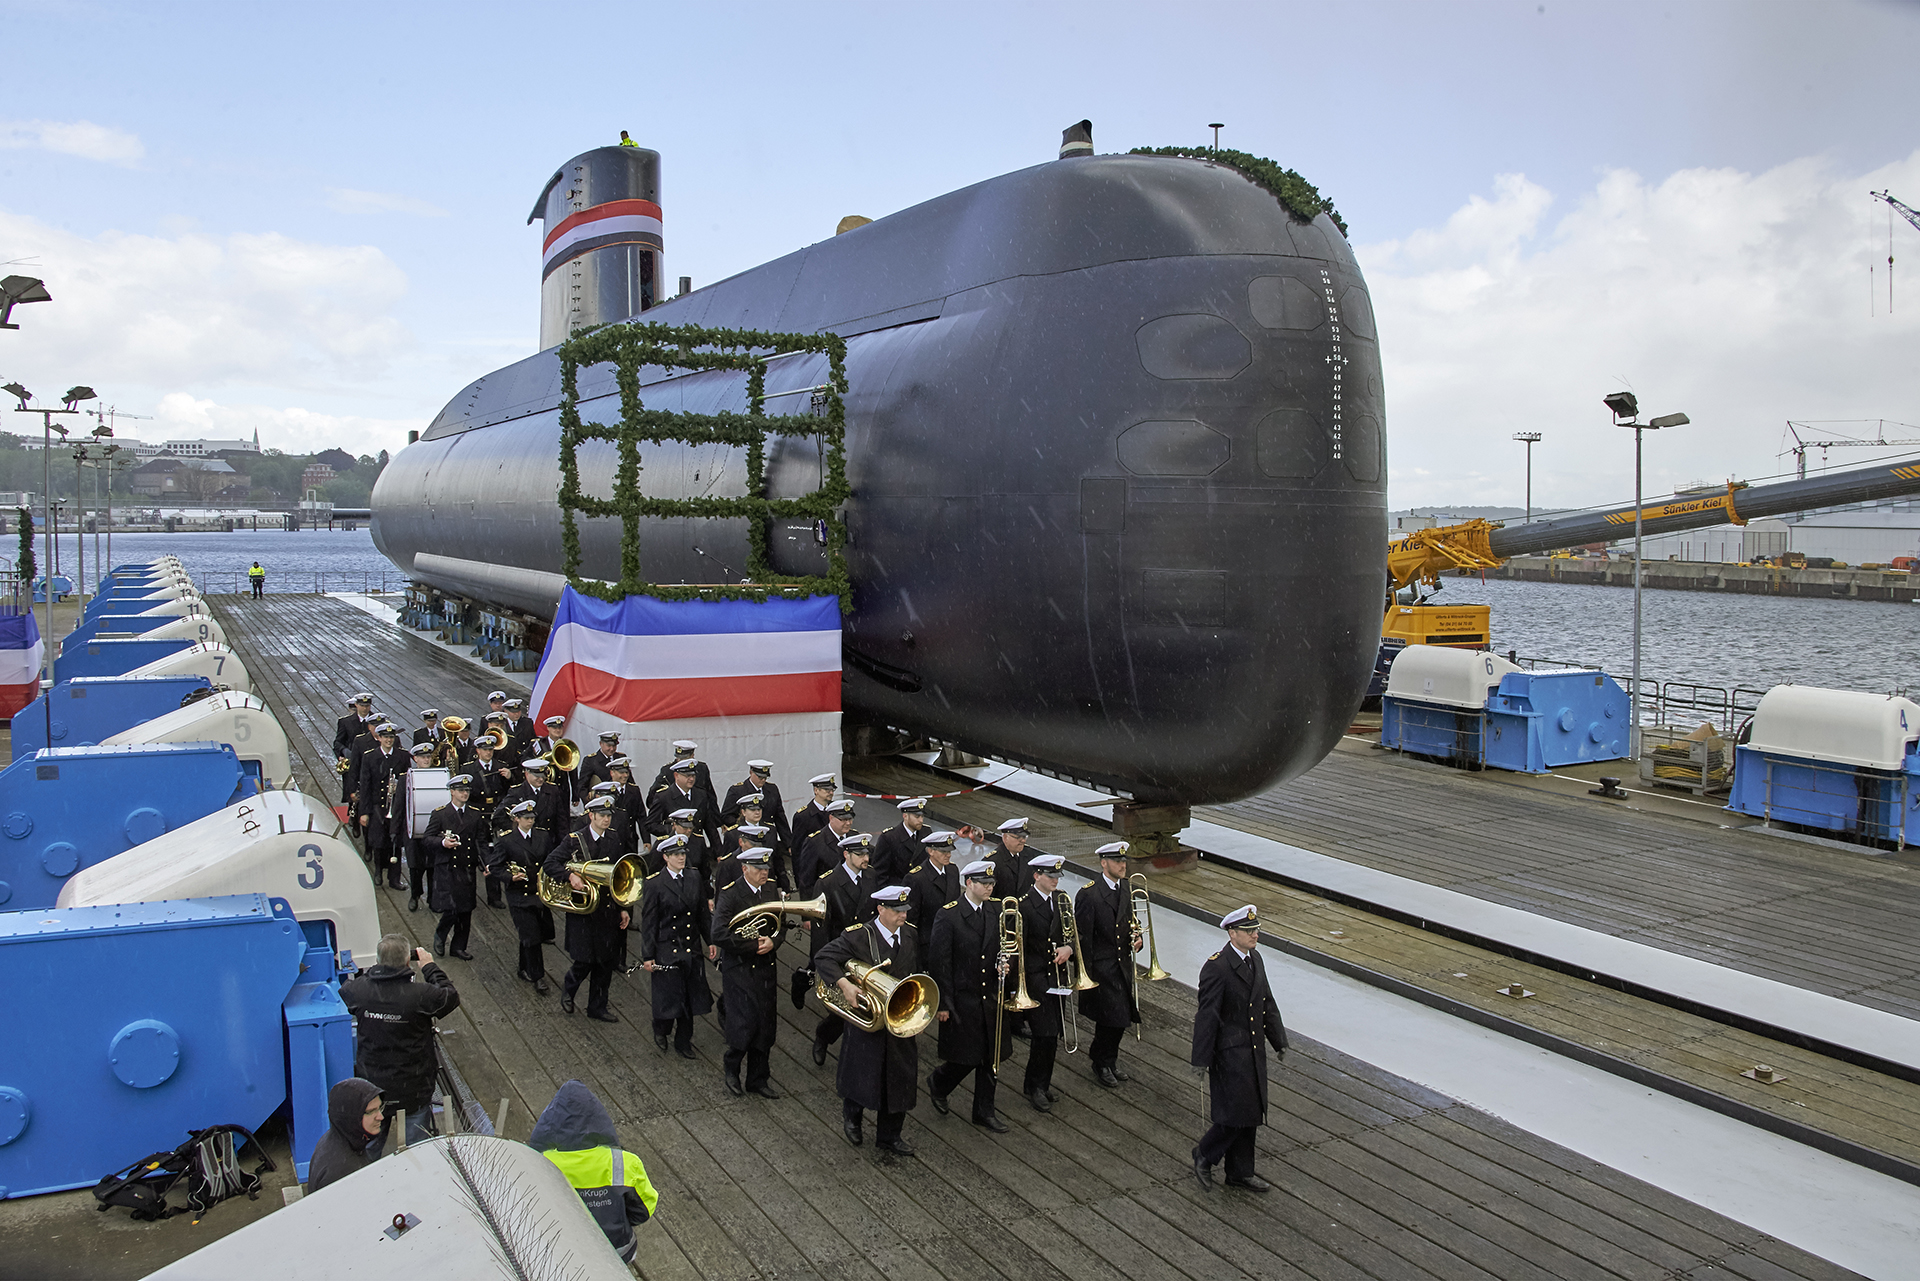 The third of four 209/1400mod class submarines for the Navy of the Arab Republic of Egypt was named and launched on May 3, 2019 at the shipyard of thyssenkrupp Marine Systems in Kiel. 